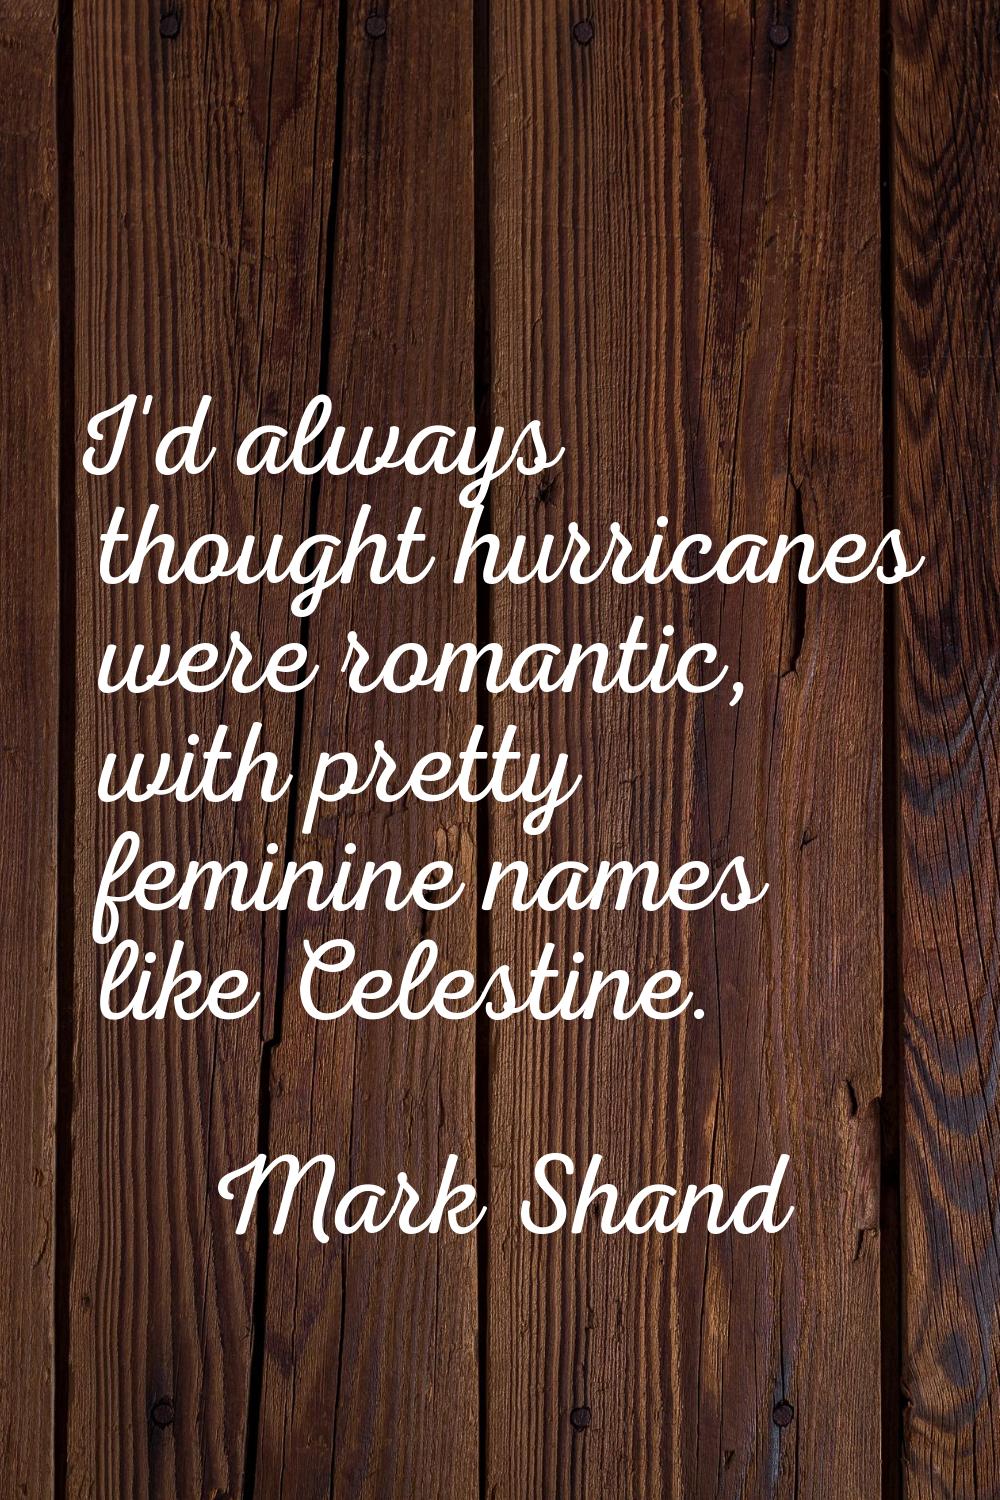 I'd always thought hurricanes were romantic, with pretty feminine names like Celestine.